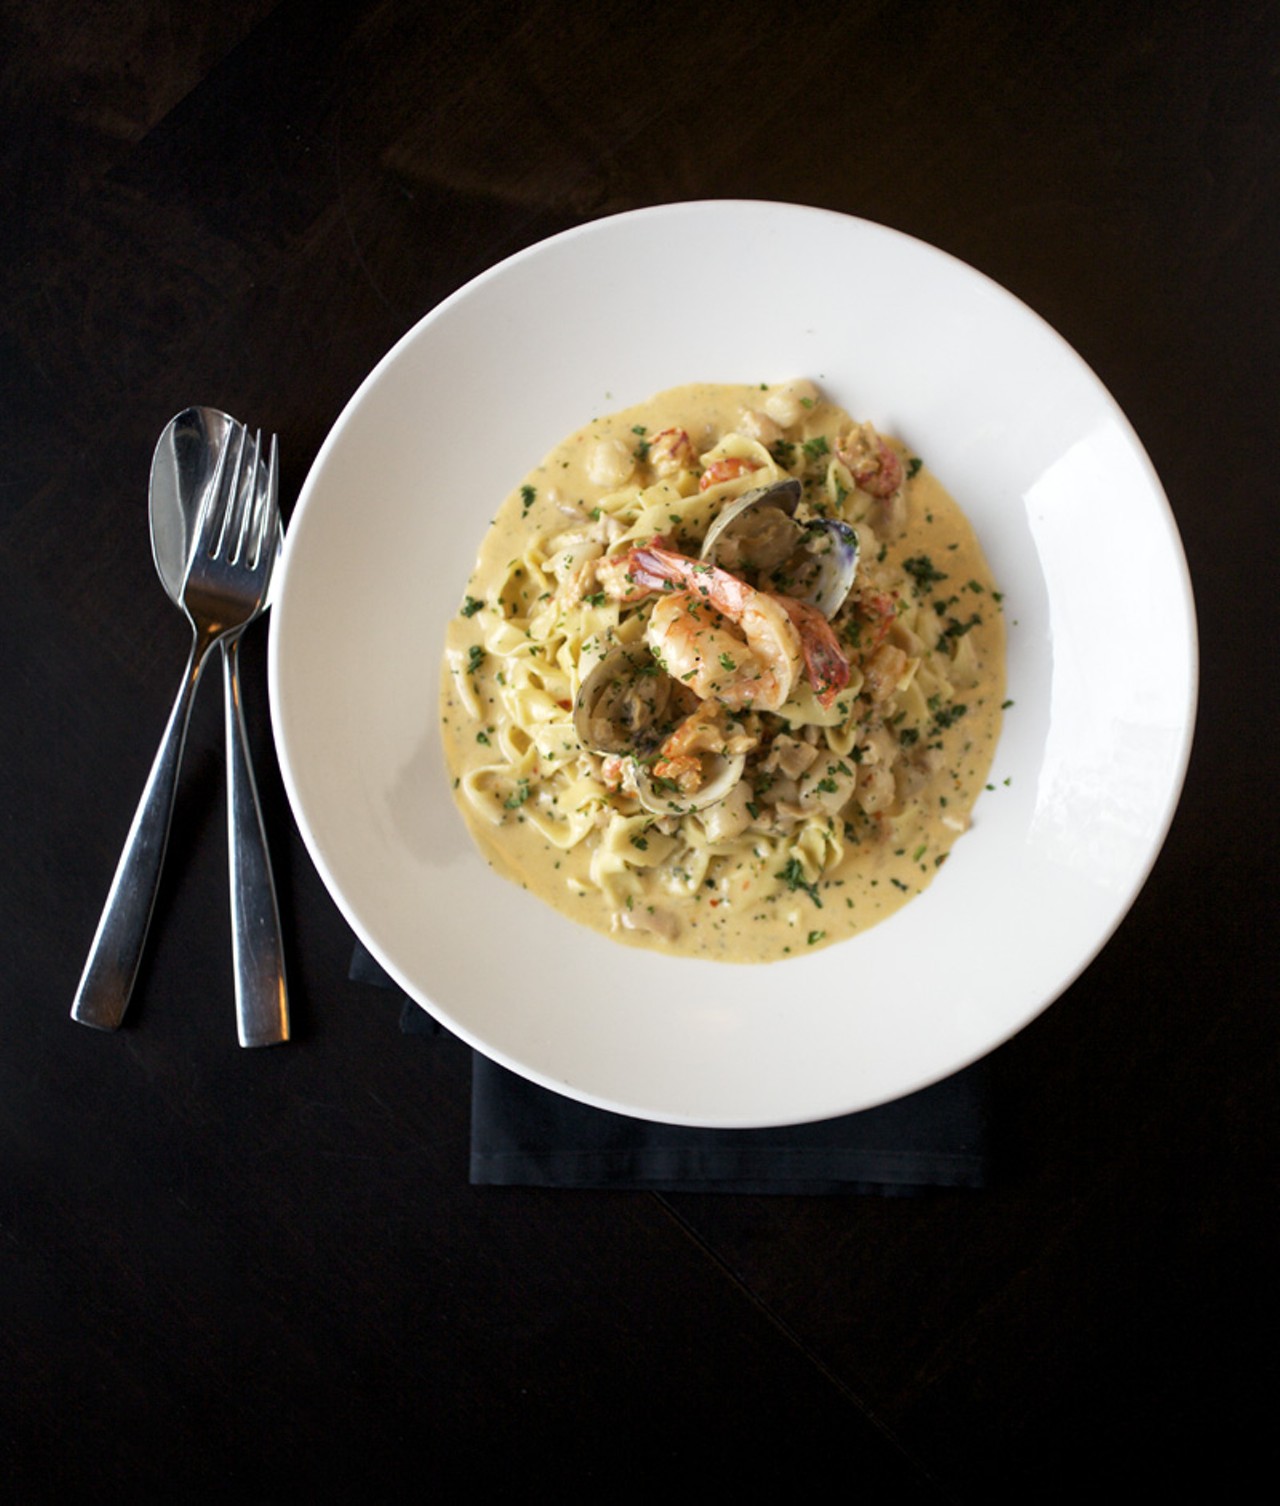 The Seafood Pasta Suzanne, named for Charlie's daughter, is fresh tagliatelle pasta, shrimp, scallops, clams, langostinos and three-pepper cream.